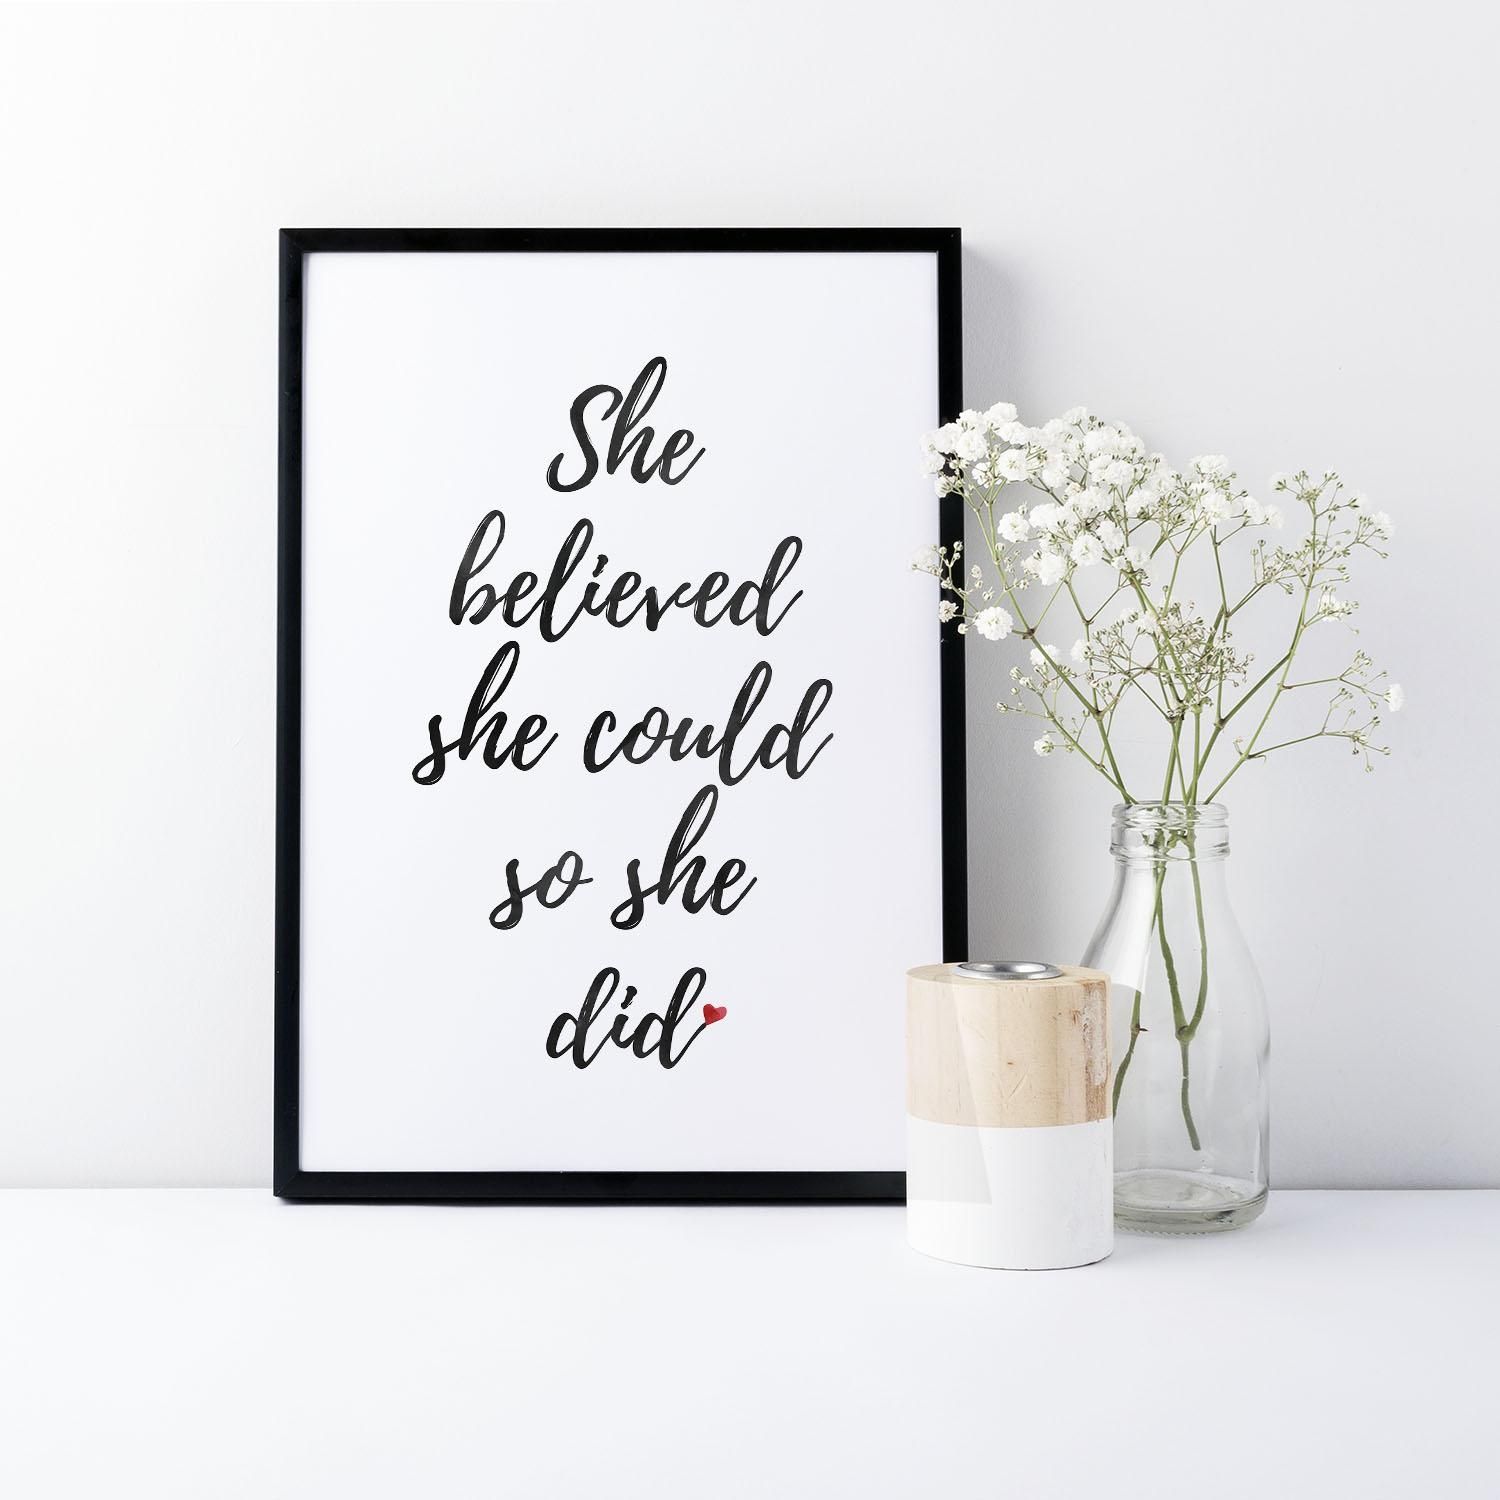 She Believed She Could So She Did' Quote Print Wall Art – Devon Inside She Believed She Could So She Did Wall Art (Photo 3 of 20)